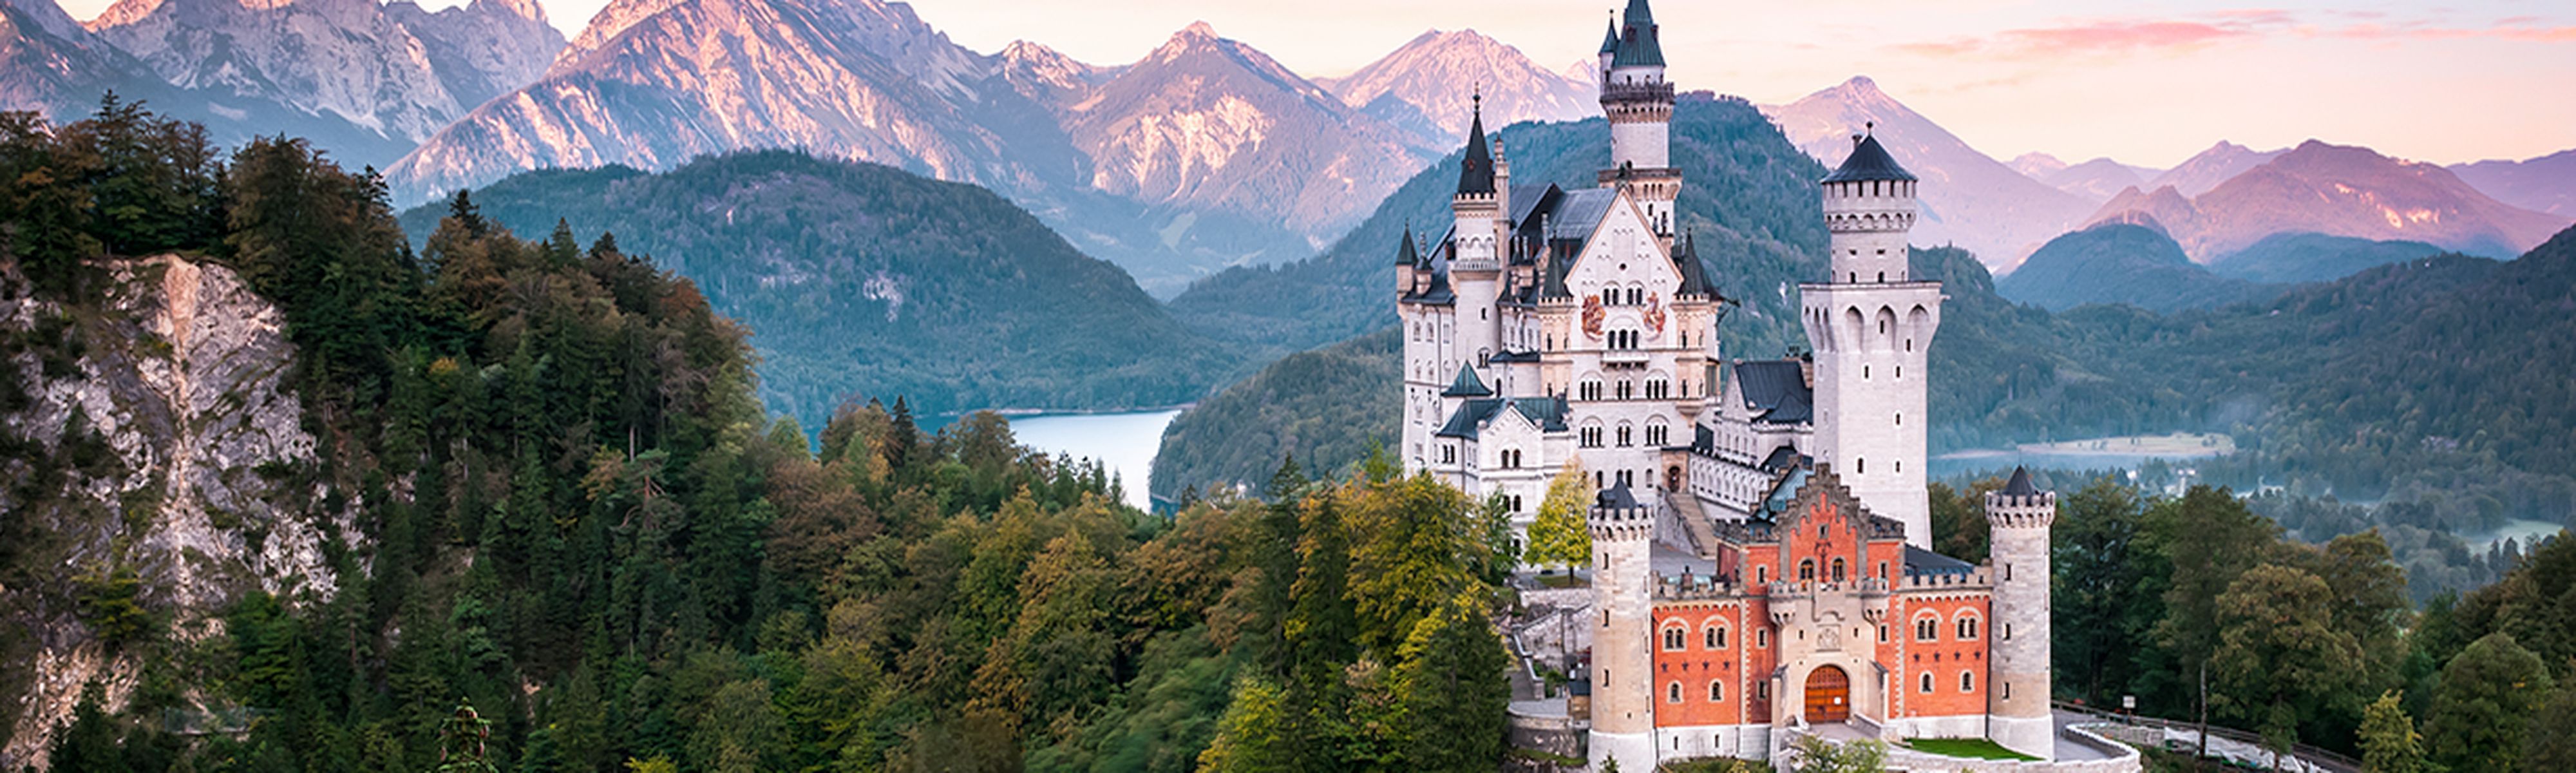 Neuschwanstein Castle at sunrise with panorama of Alps